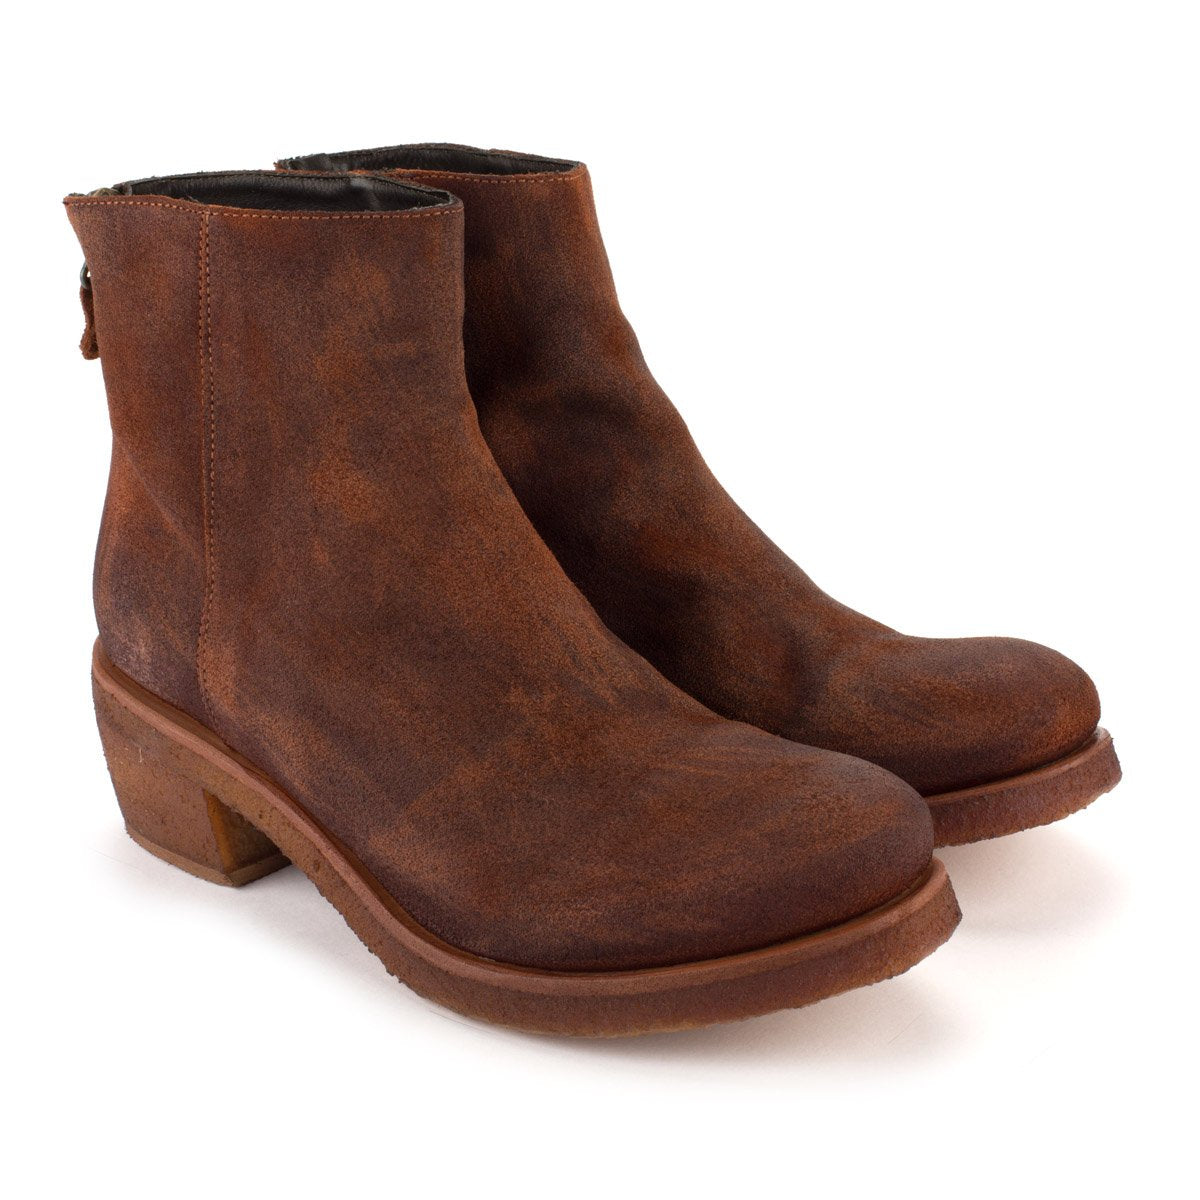 TEXAS 03 SUEDE BOOTS – Rust